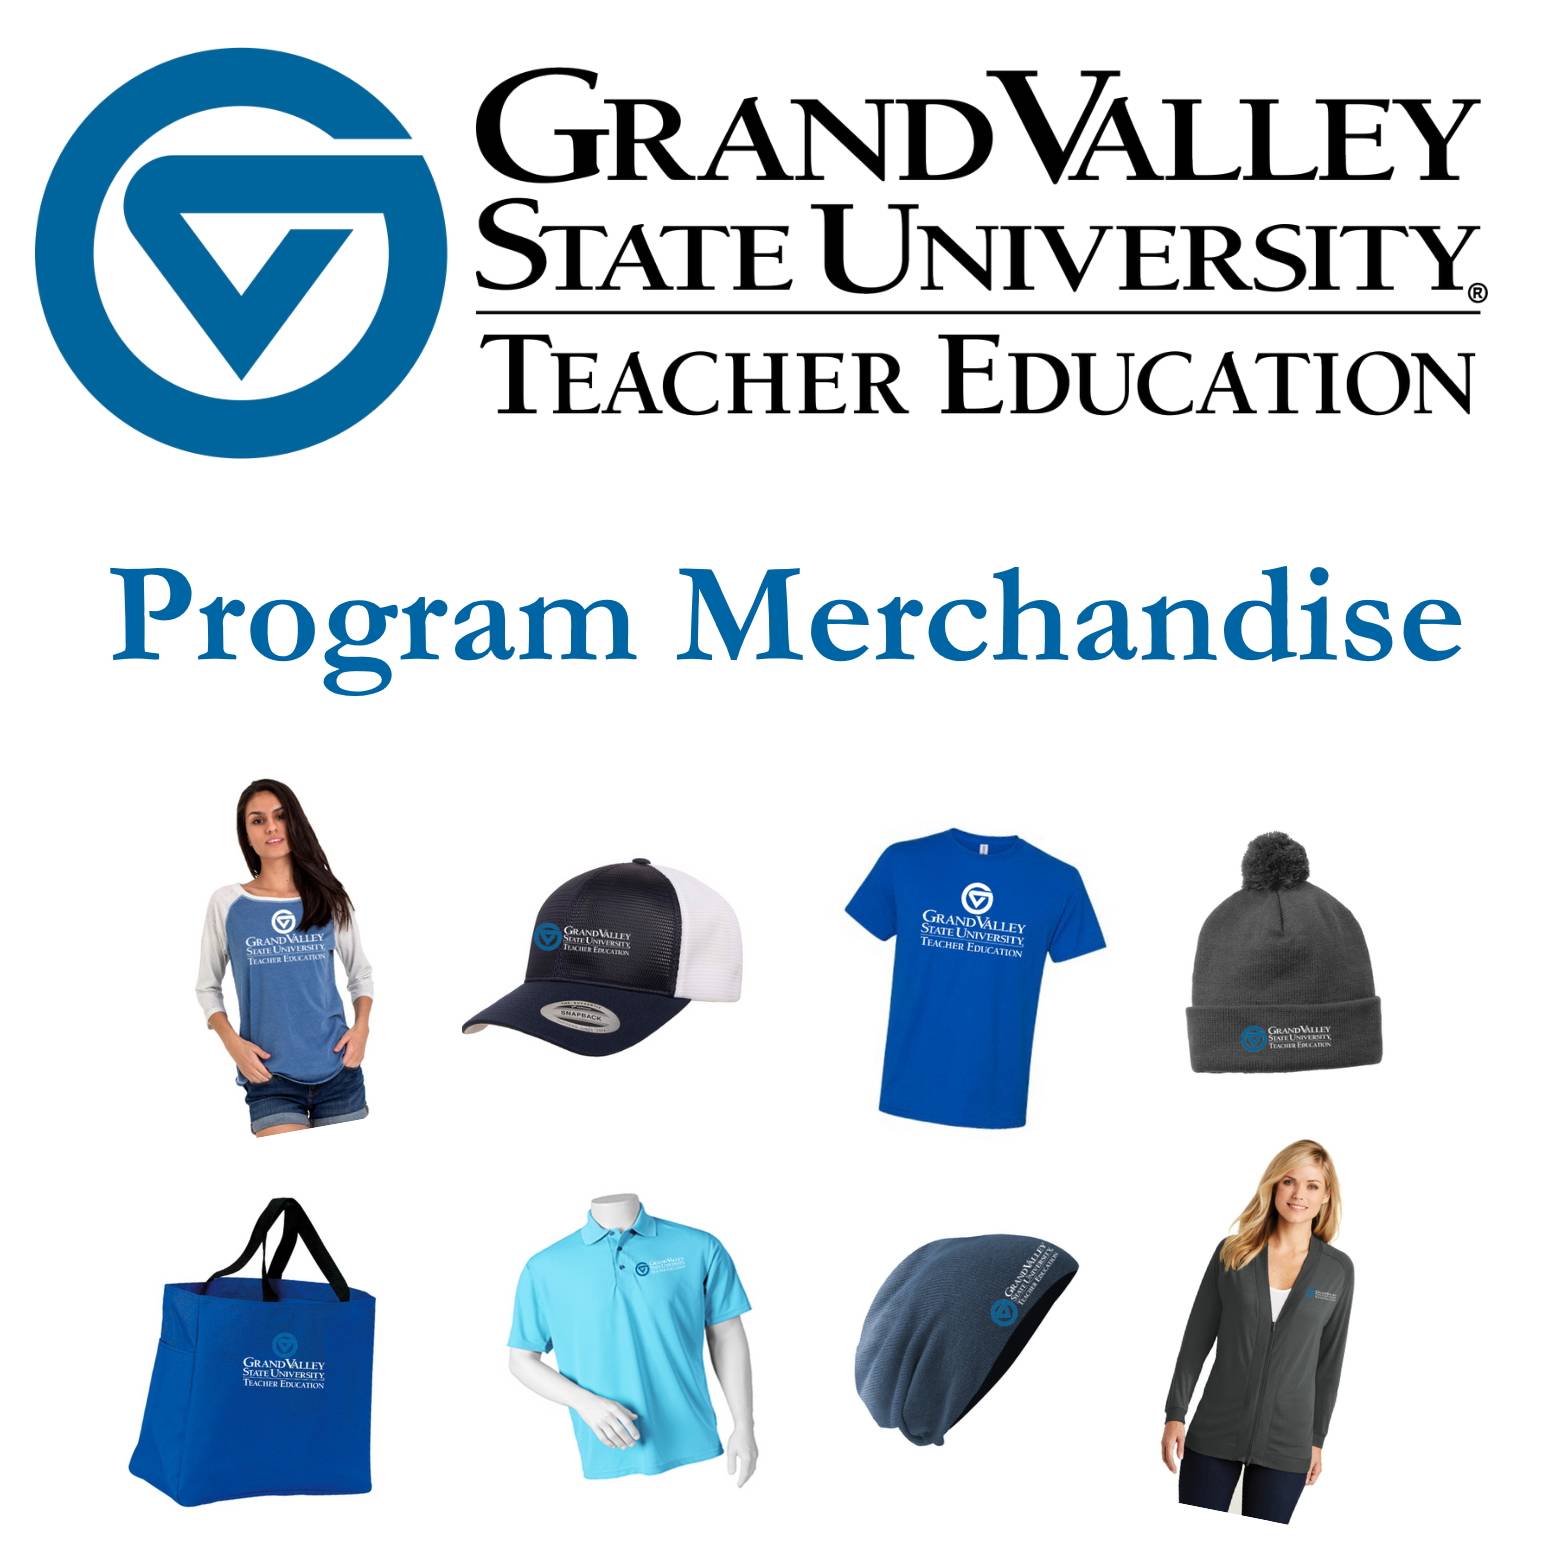 Teacher Education Program logo merchandise, with a variety of items in Adult and Ladies apparel and accessories.